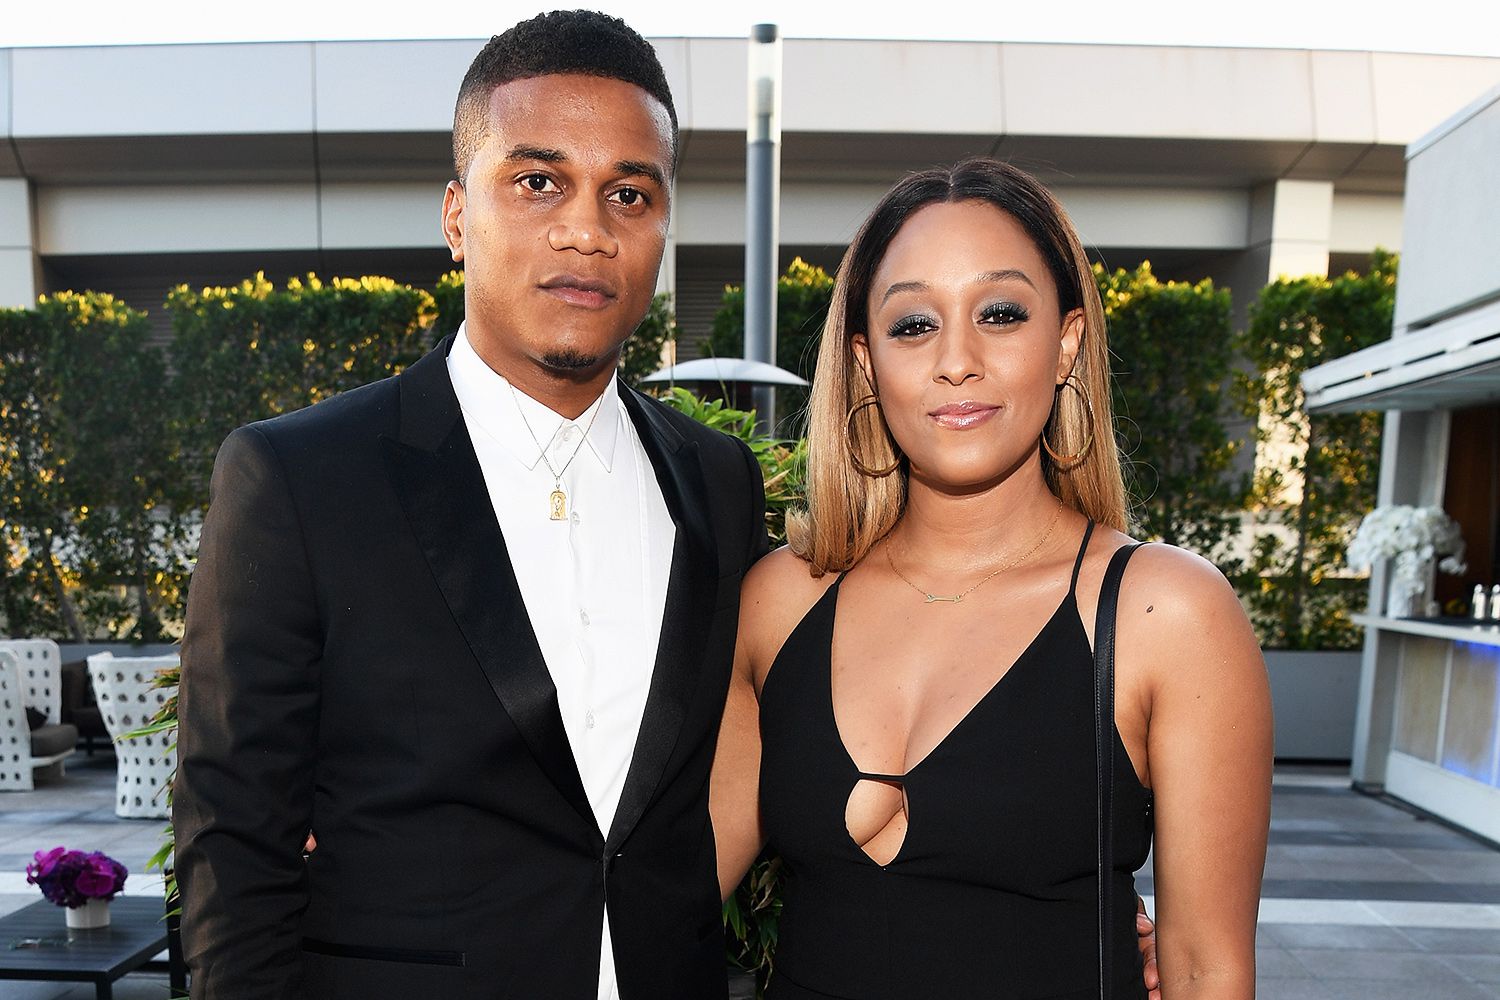 Tia Mowry filed for divorce from husband Cory Hardrict